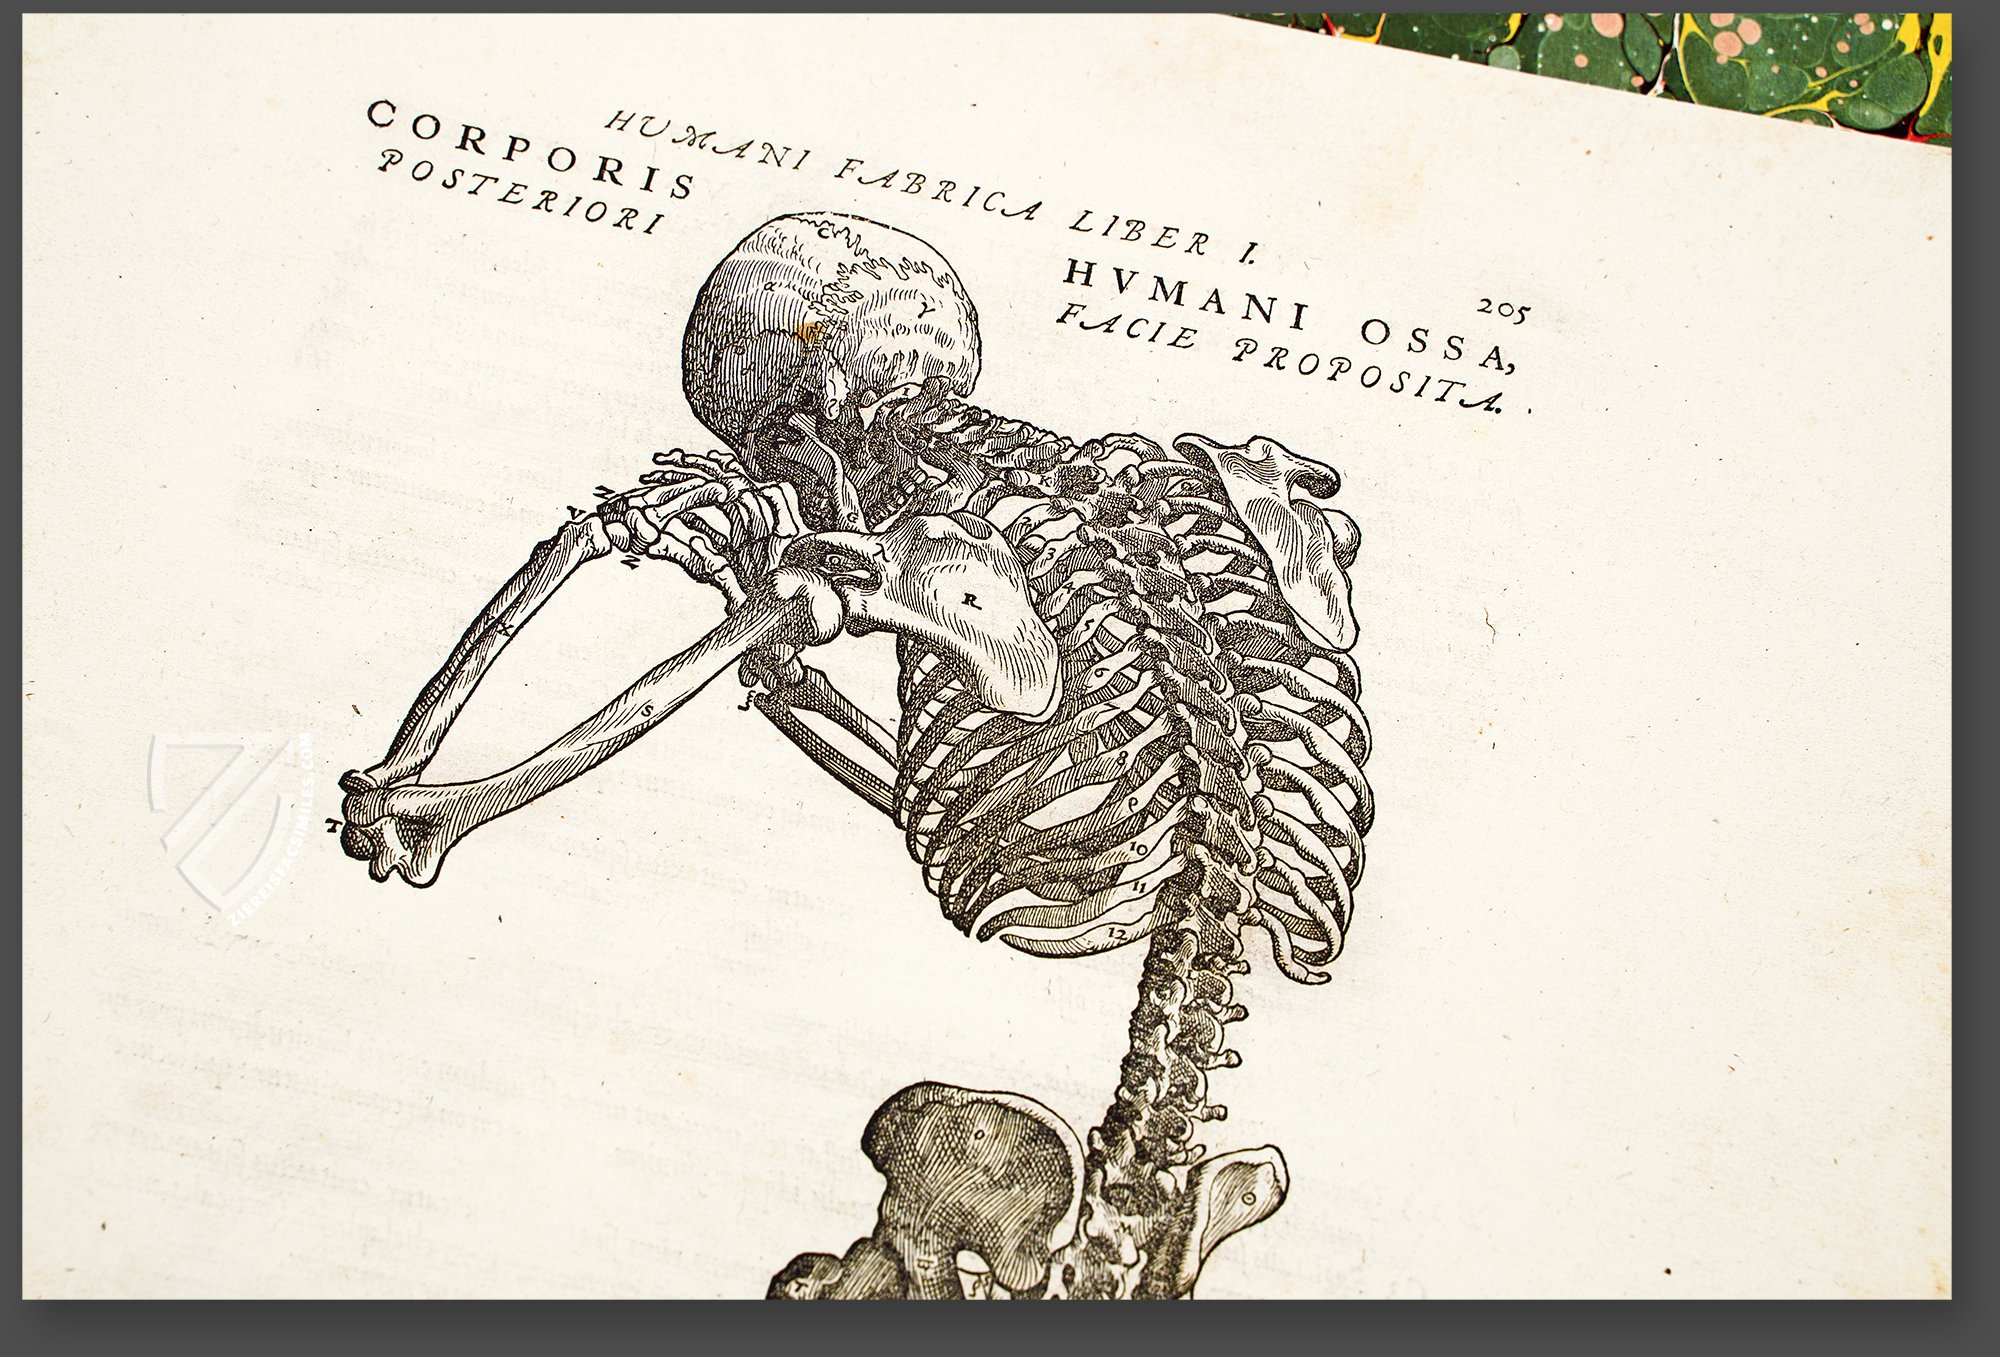 Andreas Vesalius (Physician and Anatomist) - On This Day